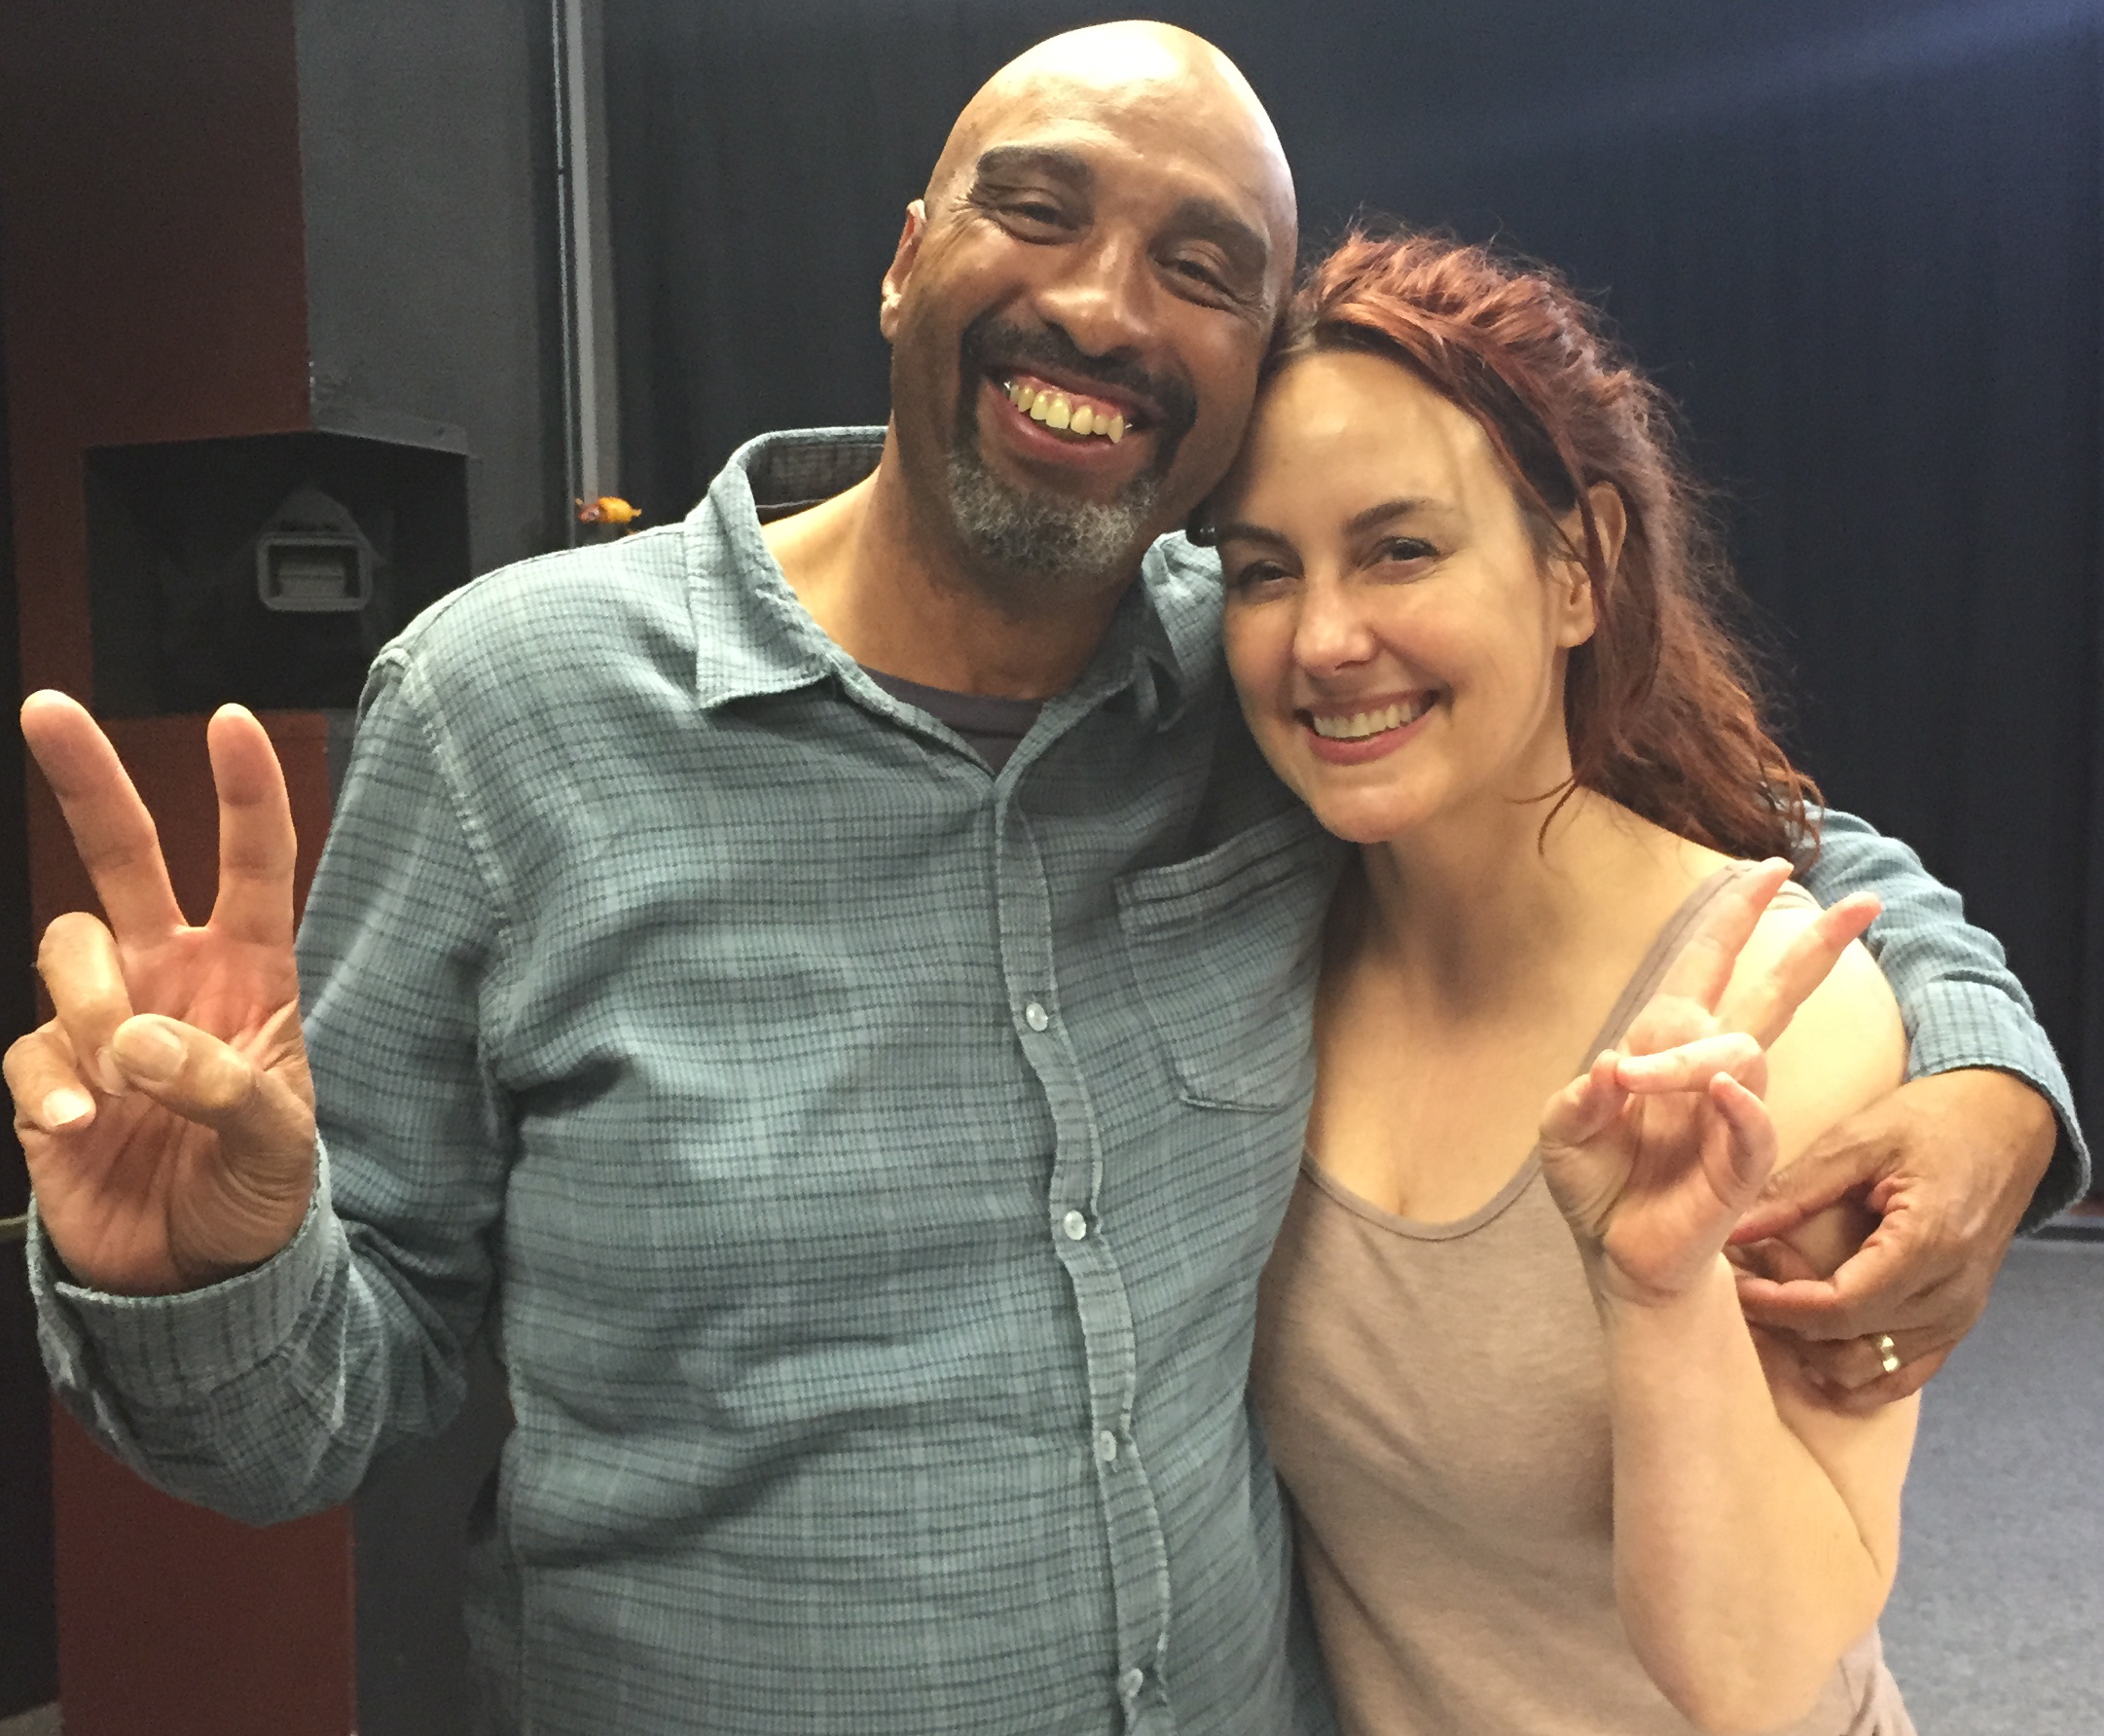 #American Actor B.T. Taylor @ #Yonda Davis Studios With #Lisa Zambetti casting Director for #Criminal Minds who turns out to be a great acting teacher who knows her stuff. Thank you#Yonda Davis for sharing your class with her.A supper acting school.